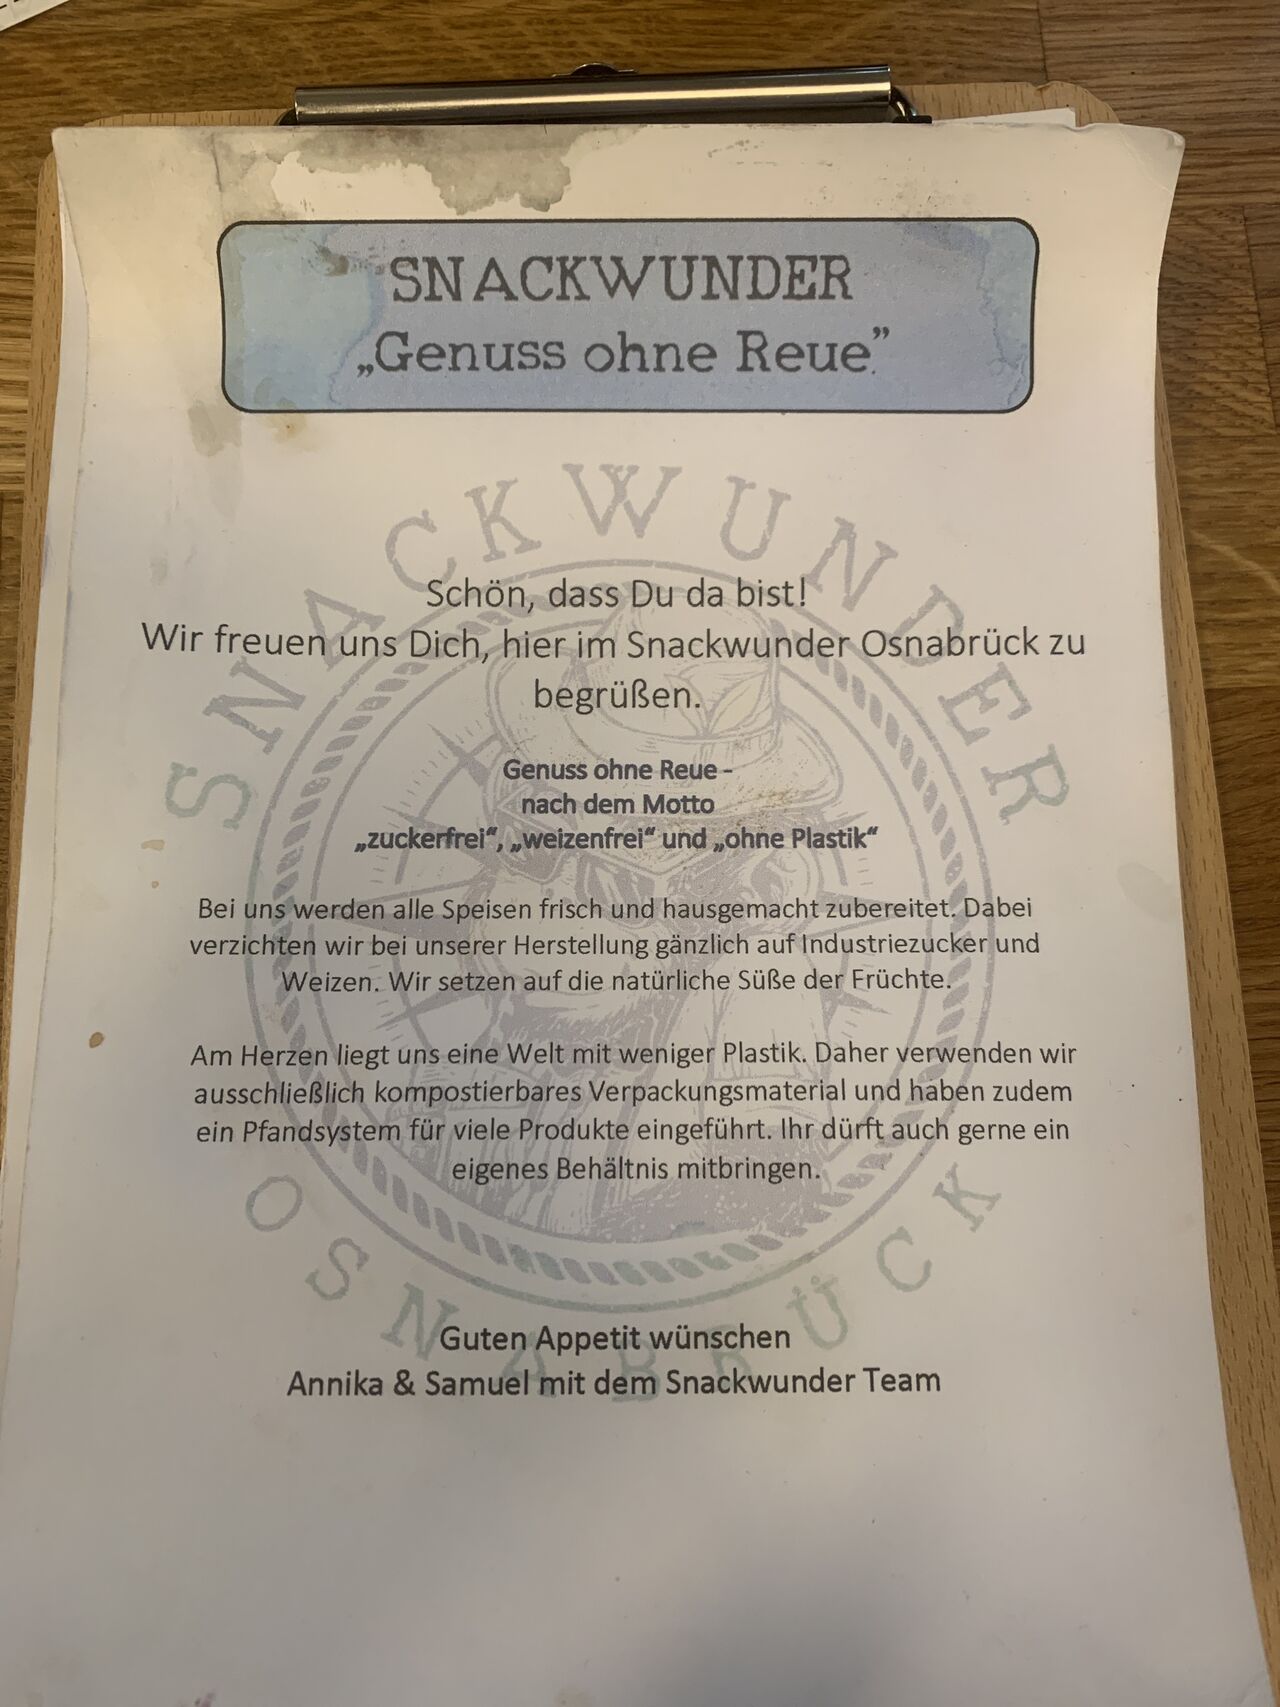 A photo of Snackwunder